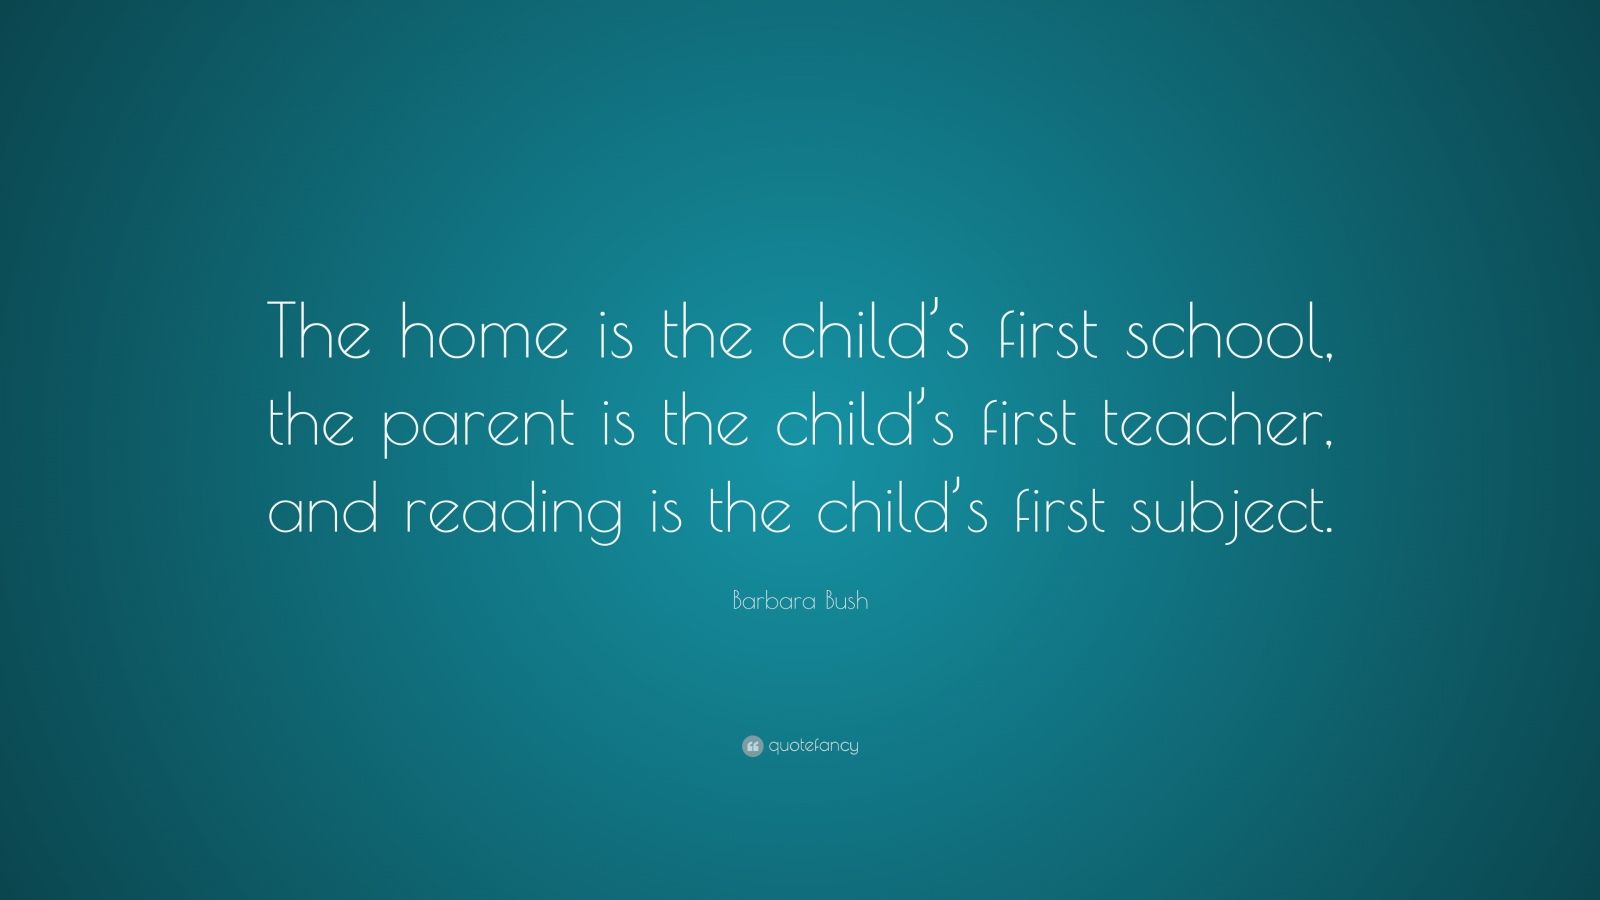 Barbara Bush Quote: “The home is the child's first school, the ...